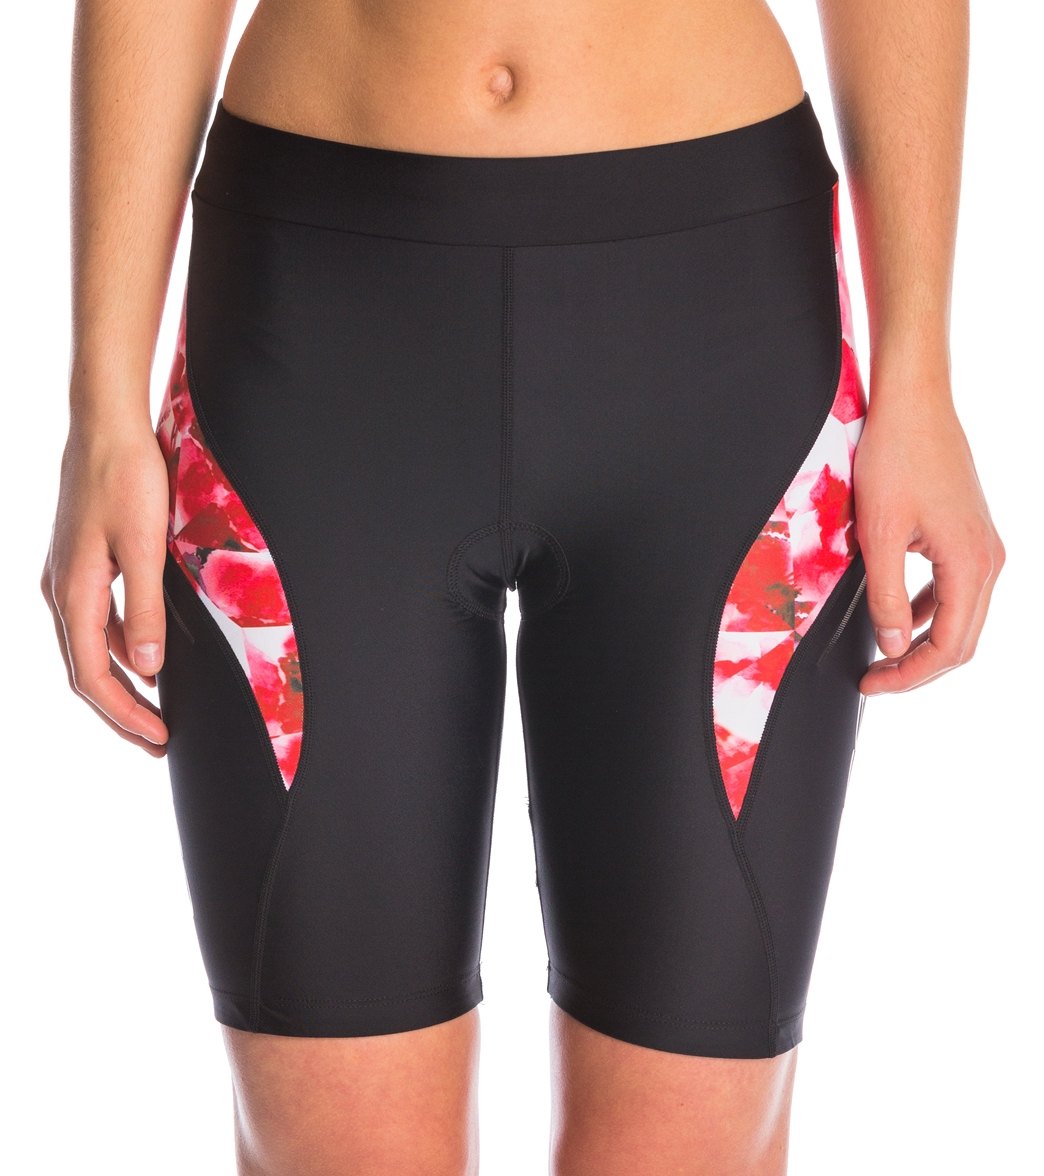 Orca Women's Core Tri Shorts at SwimOutlet.com - Free Shipping